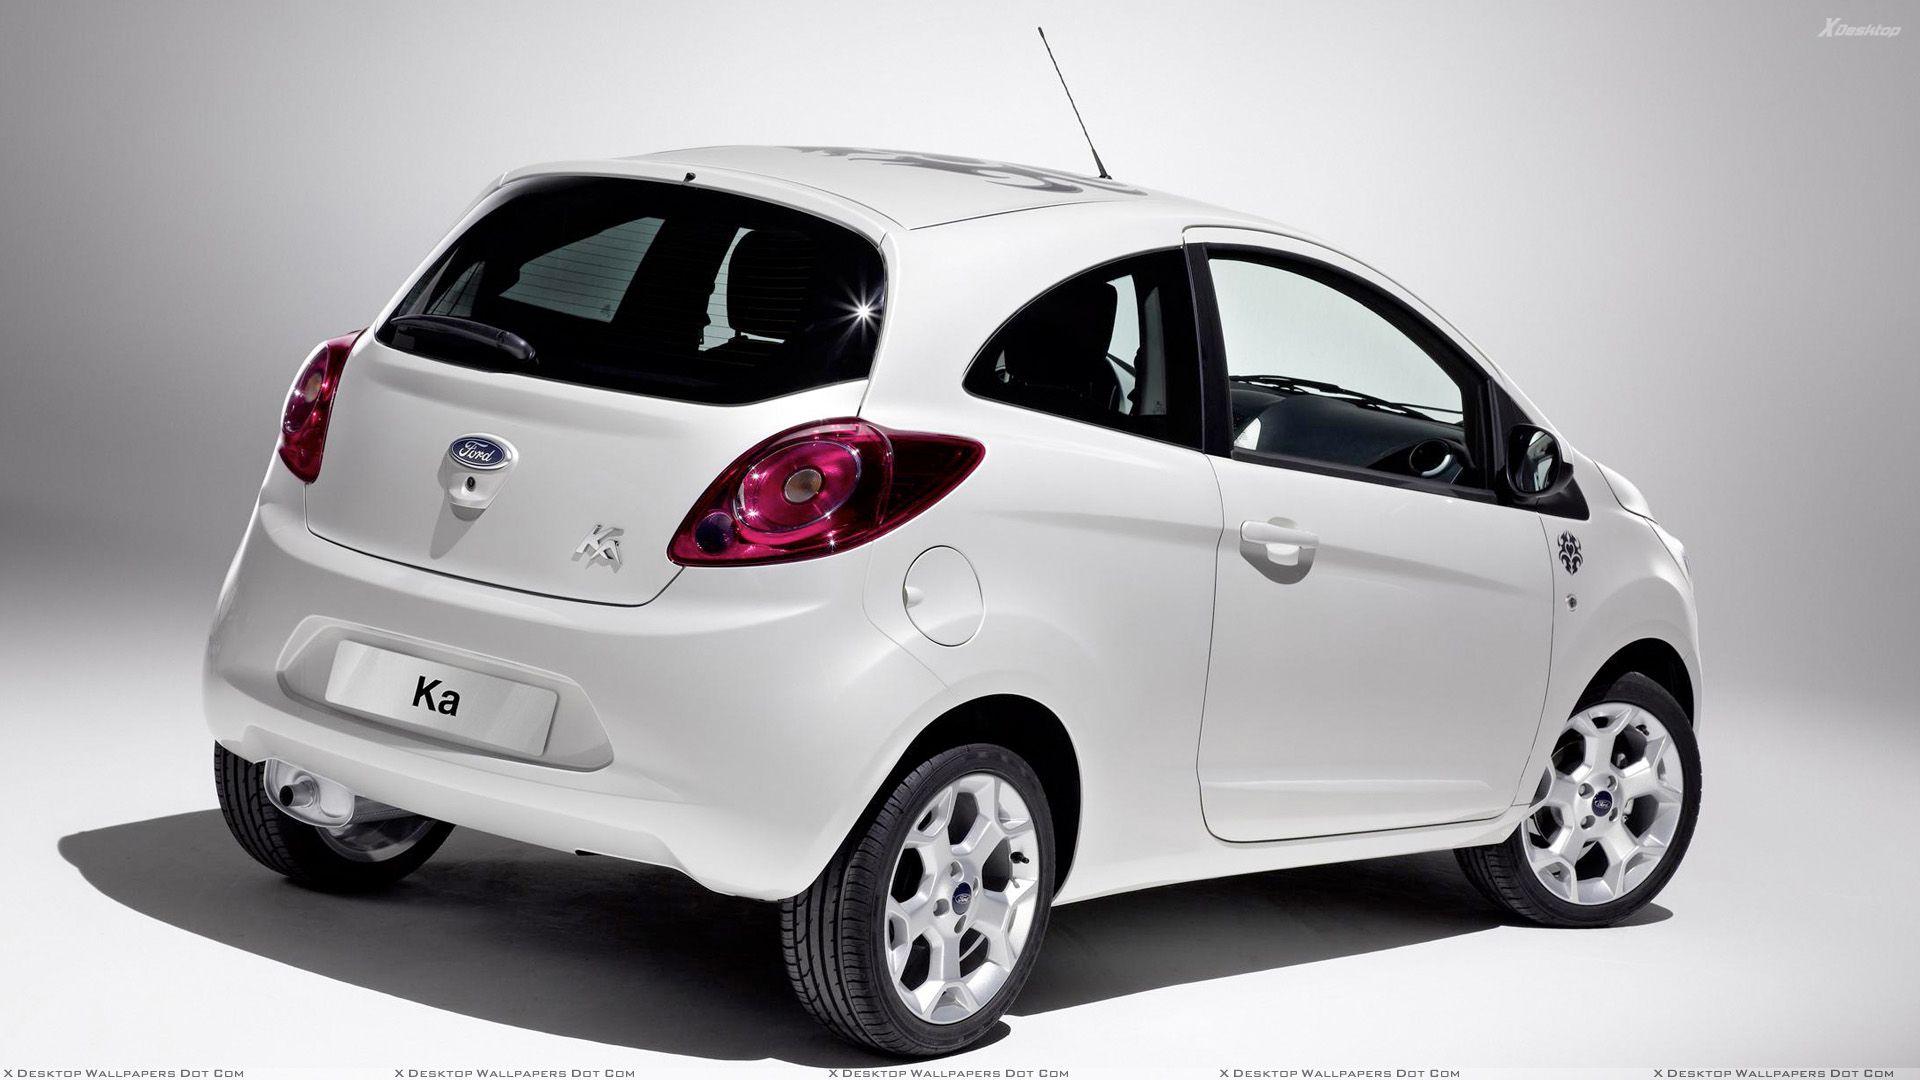 Ford Ka Wallpapers, Photos & Image in HD